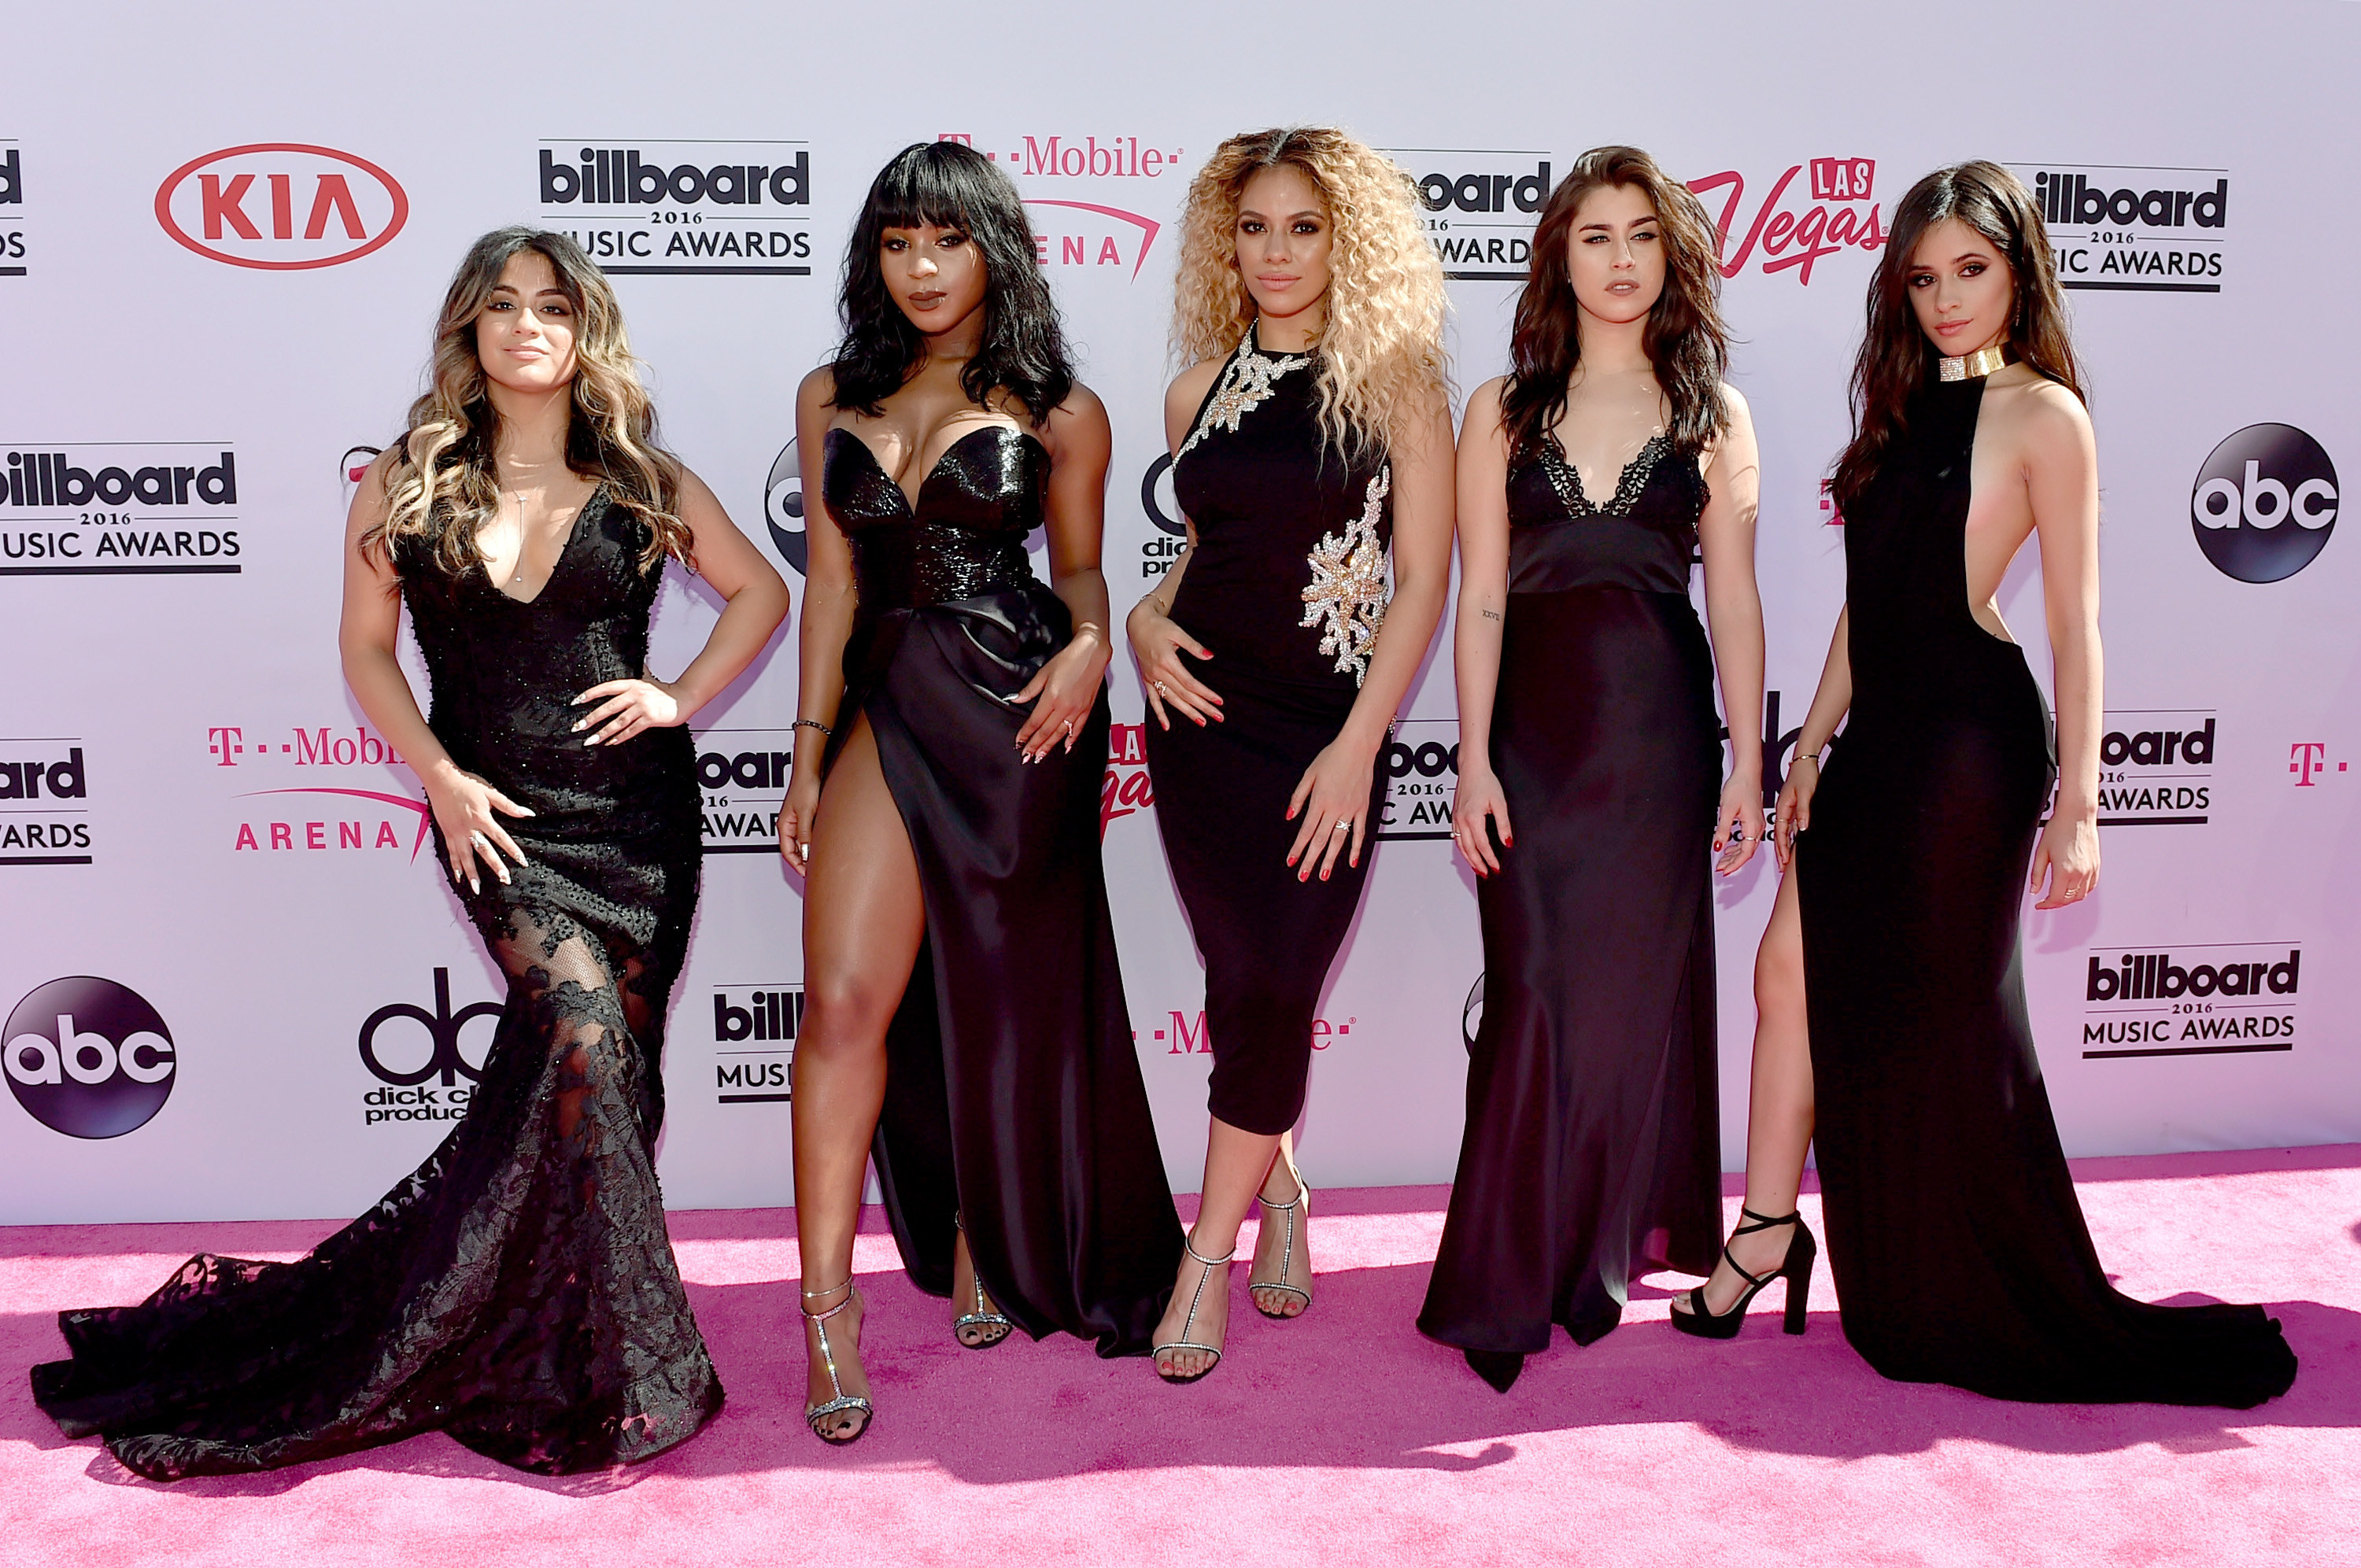 Fifth Harmony pose on a red carpet